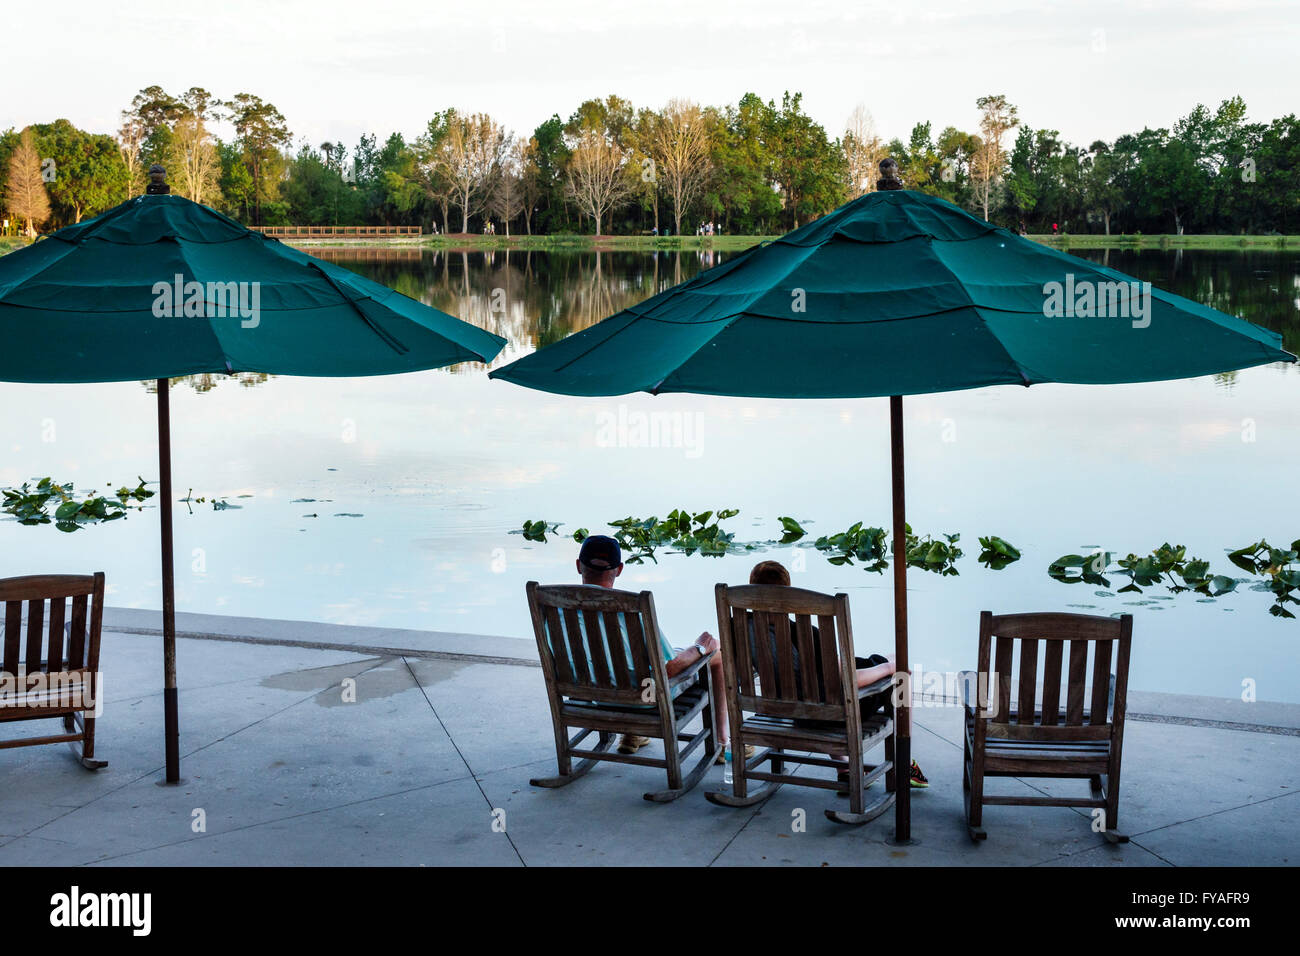 Orlando Florida,master-planned community,neo-urbanism,downtown,Front Street,Lake Rianhard,rocking chairs,umbrellas,scenery,water,couple,relaxing,Town Stock Photo